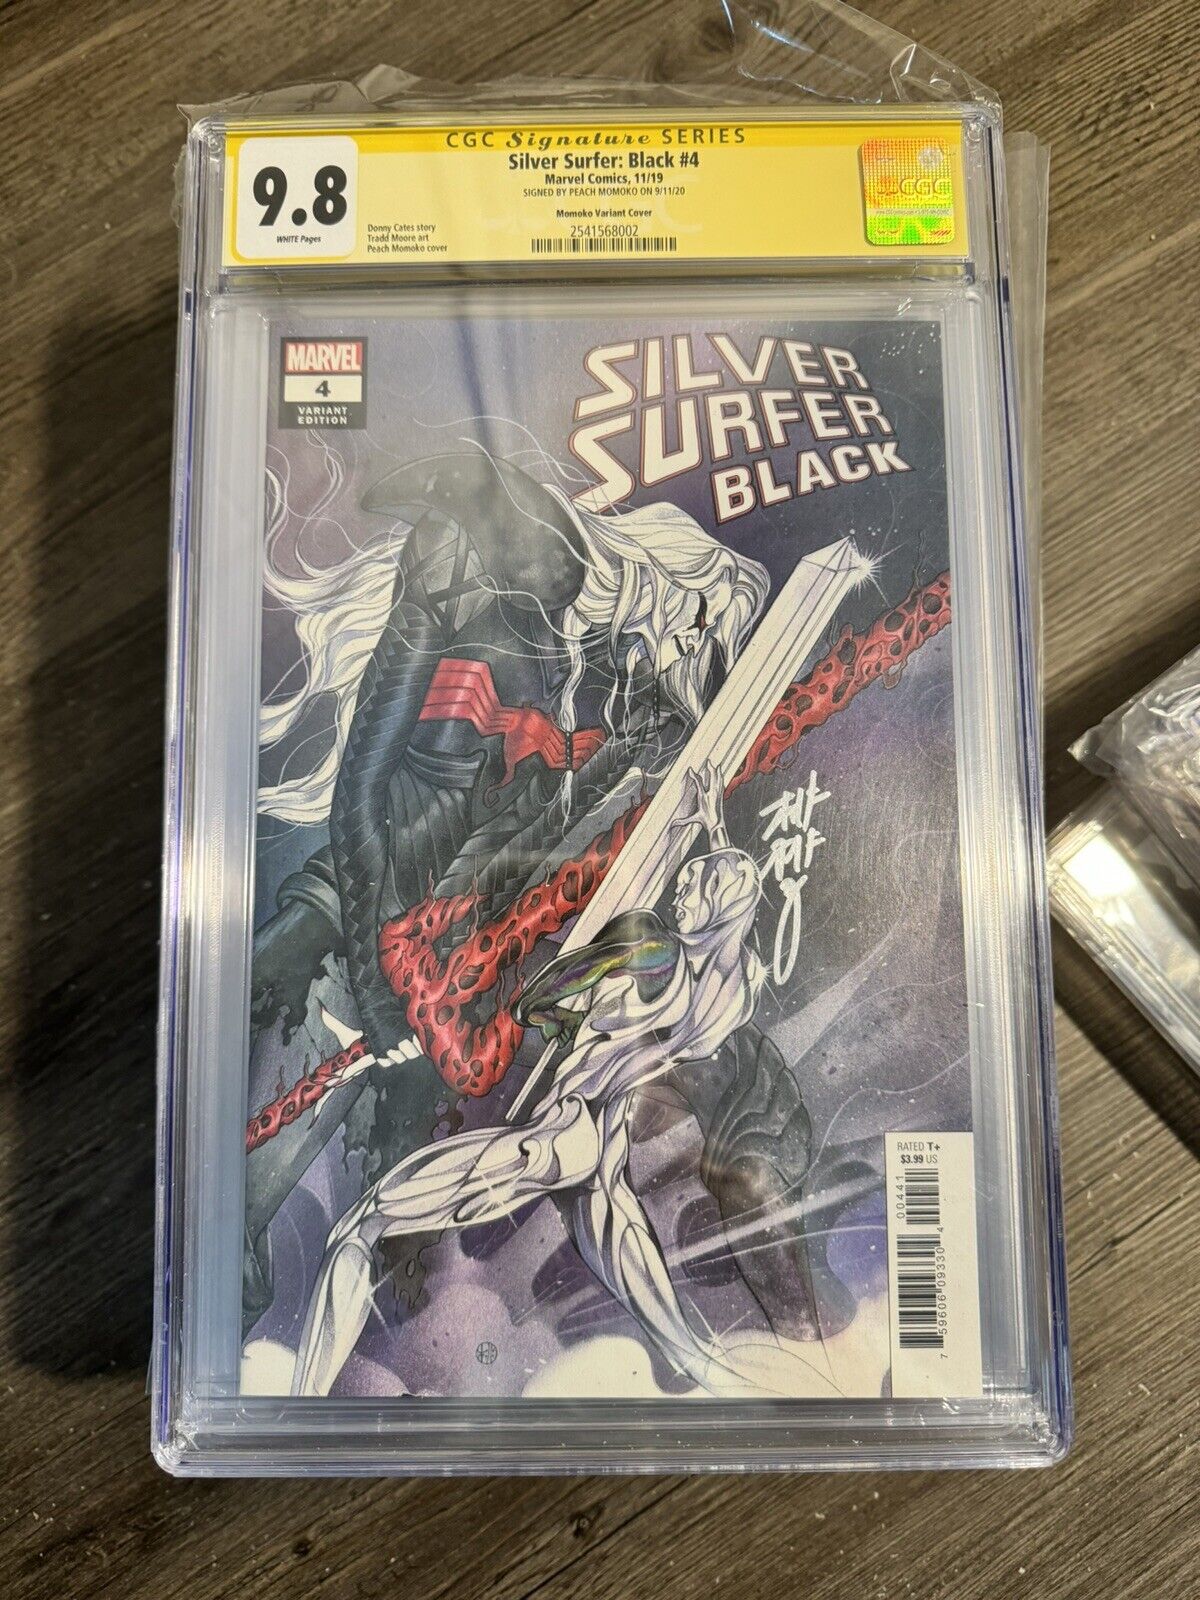 SILVER SURFER: BLACK #4 CGC 9.8 SIGNED  BY PEACH MOMOKO, 1:25 